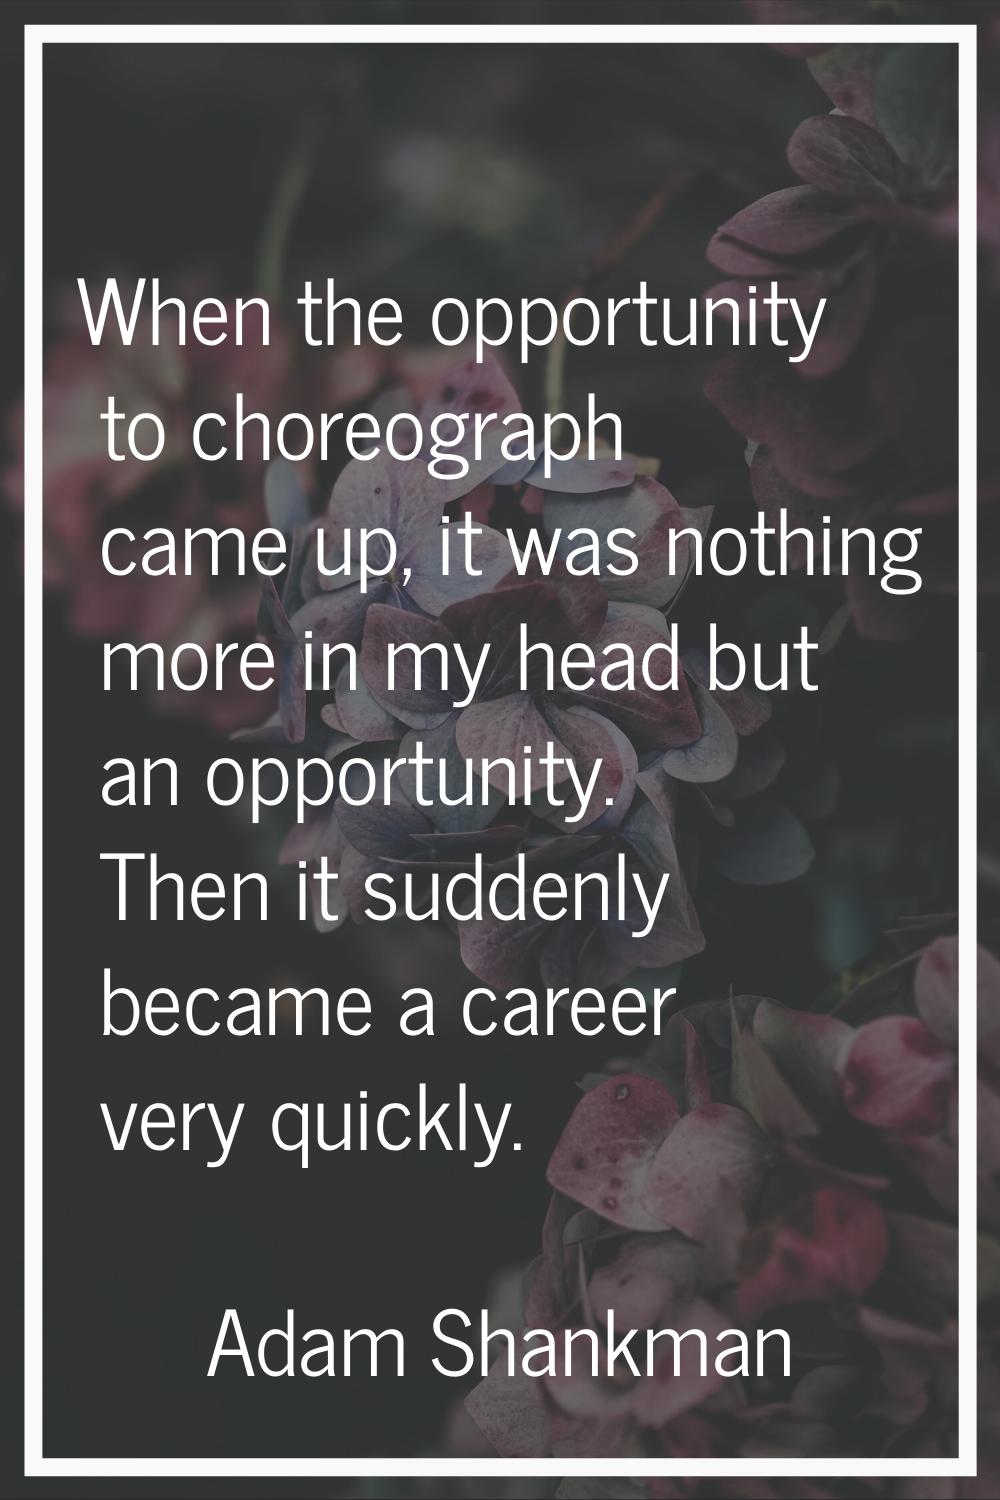 When the opportunity to choreograph came up, it was nothing more in my head but an opportunity. The